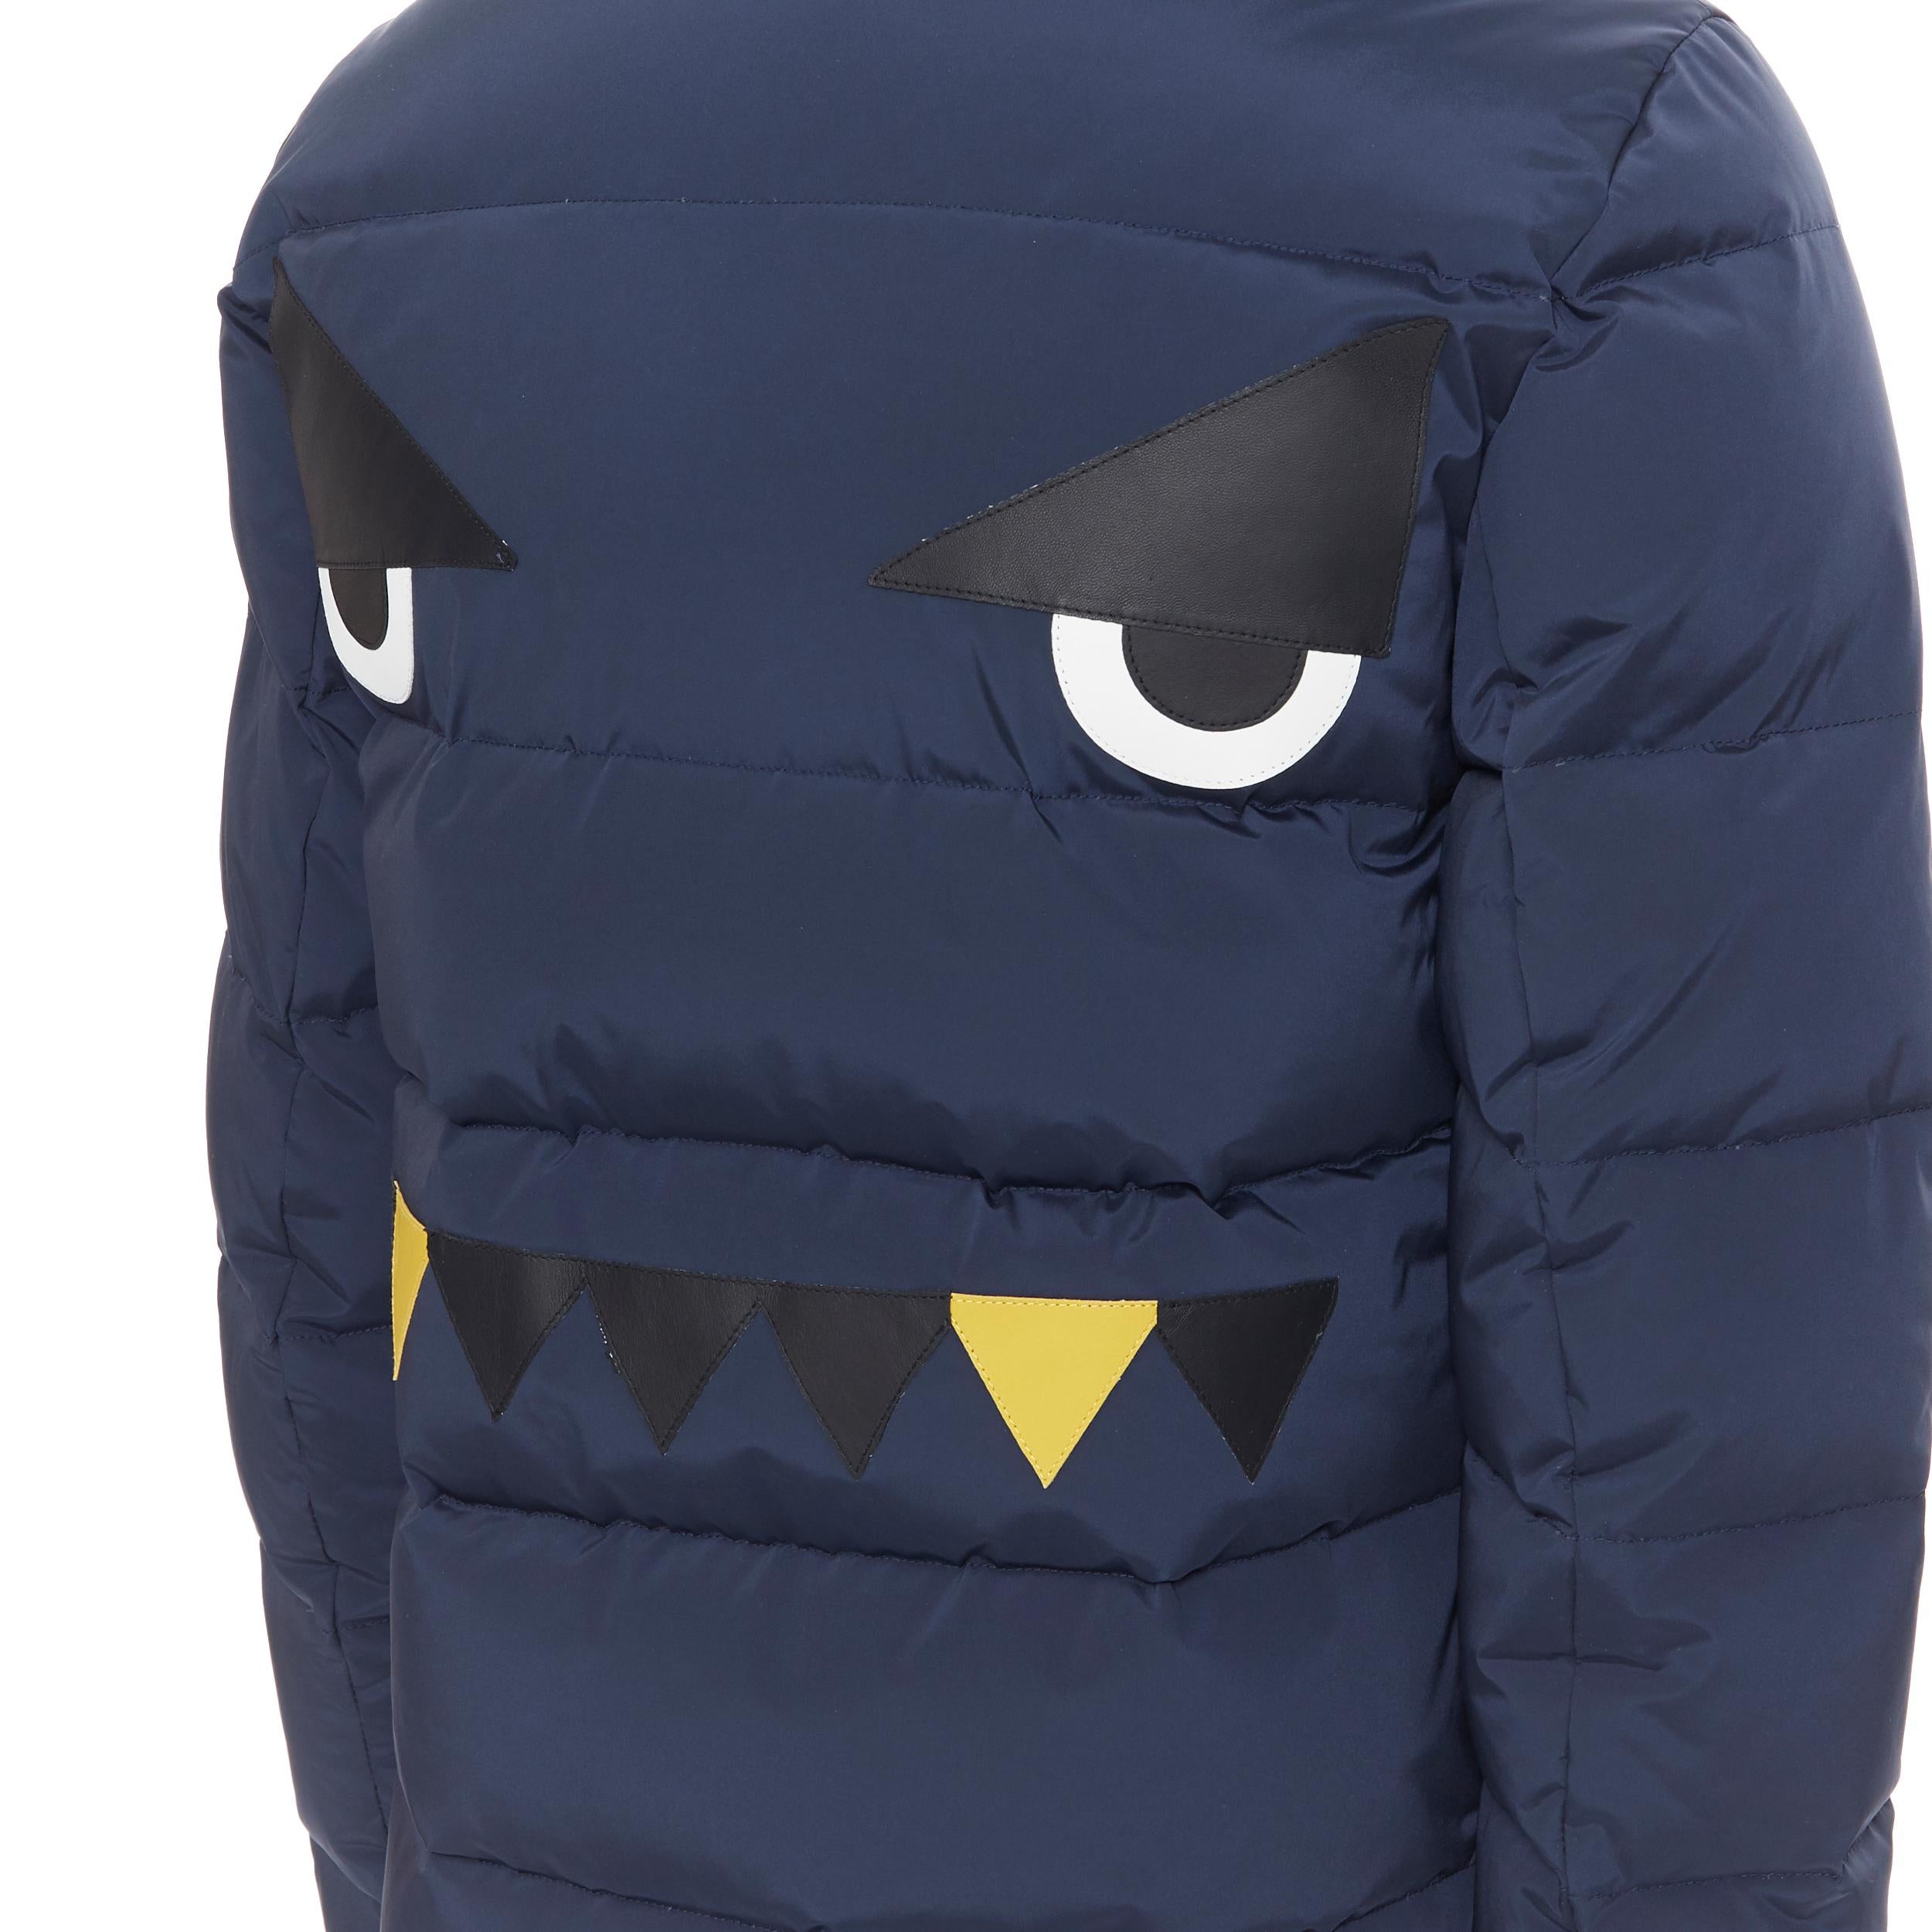 new FENDI Monster Face Ski navy blue goose down padded puffer jacket IT46 S
Brand: Fendi
Model Name / Style: Monster Ski
Material: Polyester
Color: Navy
Pattern: Solid
Closure: Zip
Extra Detail: Signature Monster face at back face. Goose down